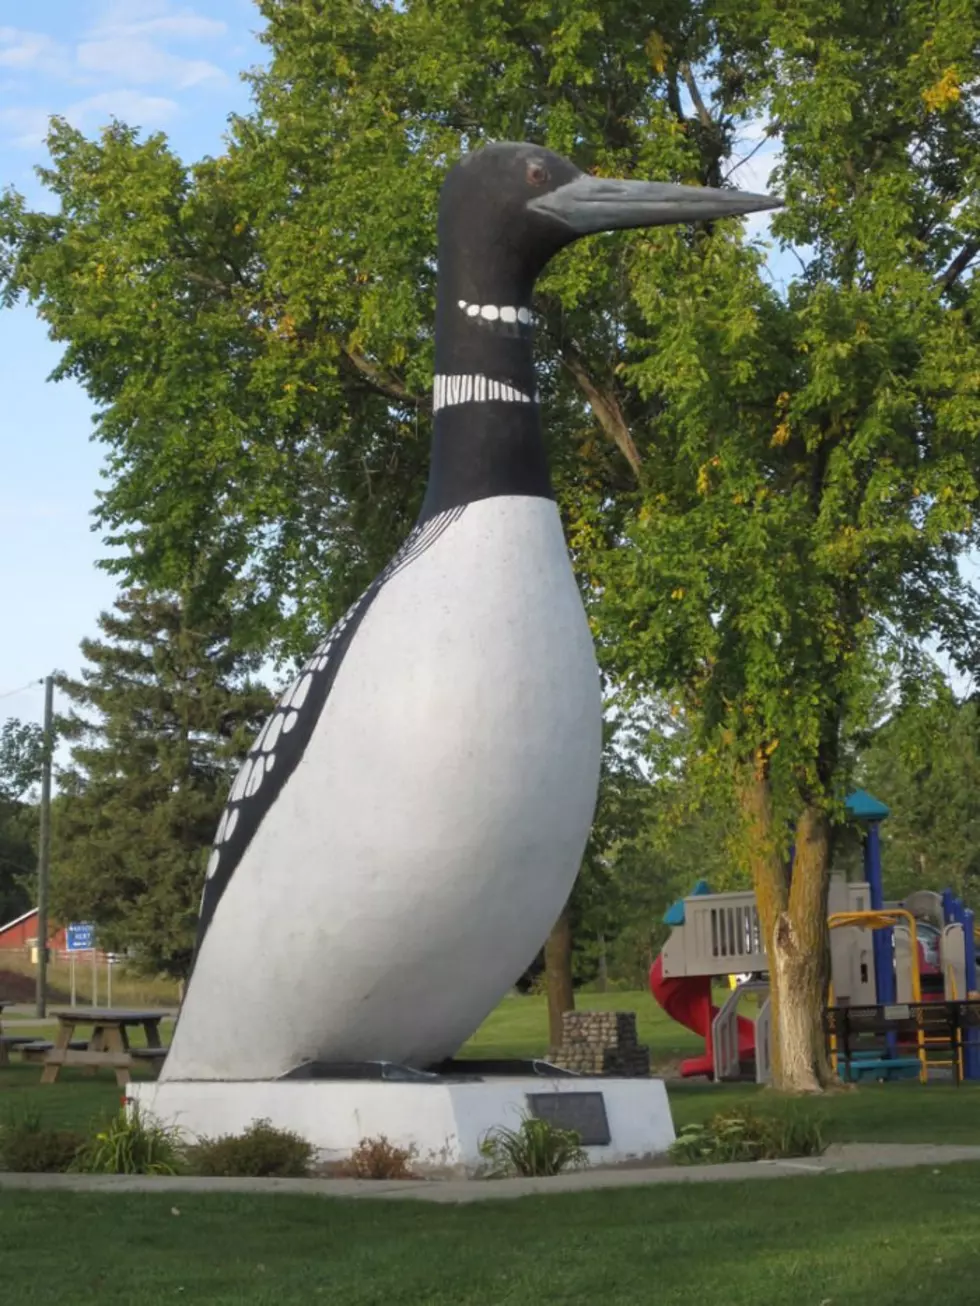 Hit The Road This Summer And See These 10 Unique Minnesota Roadside Attractions!